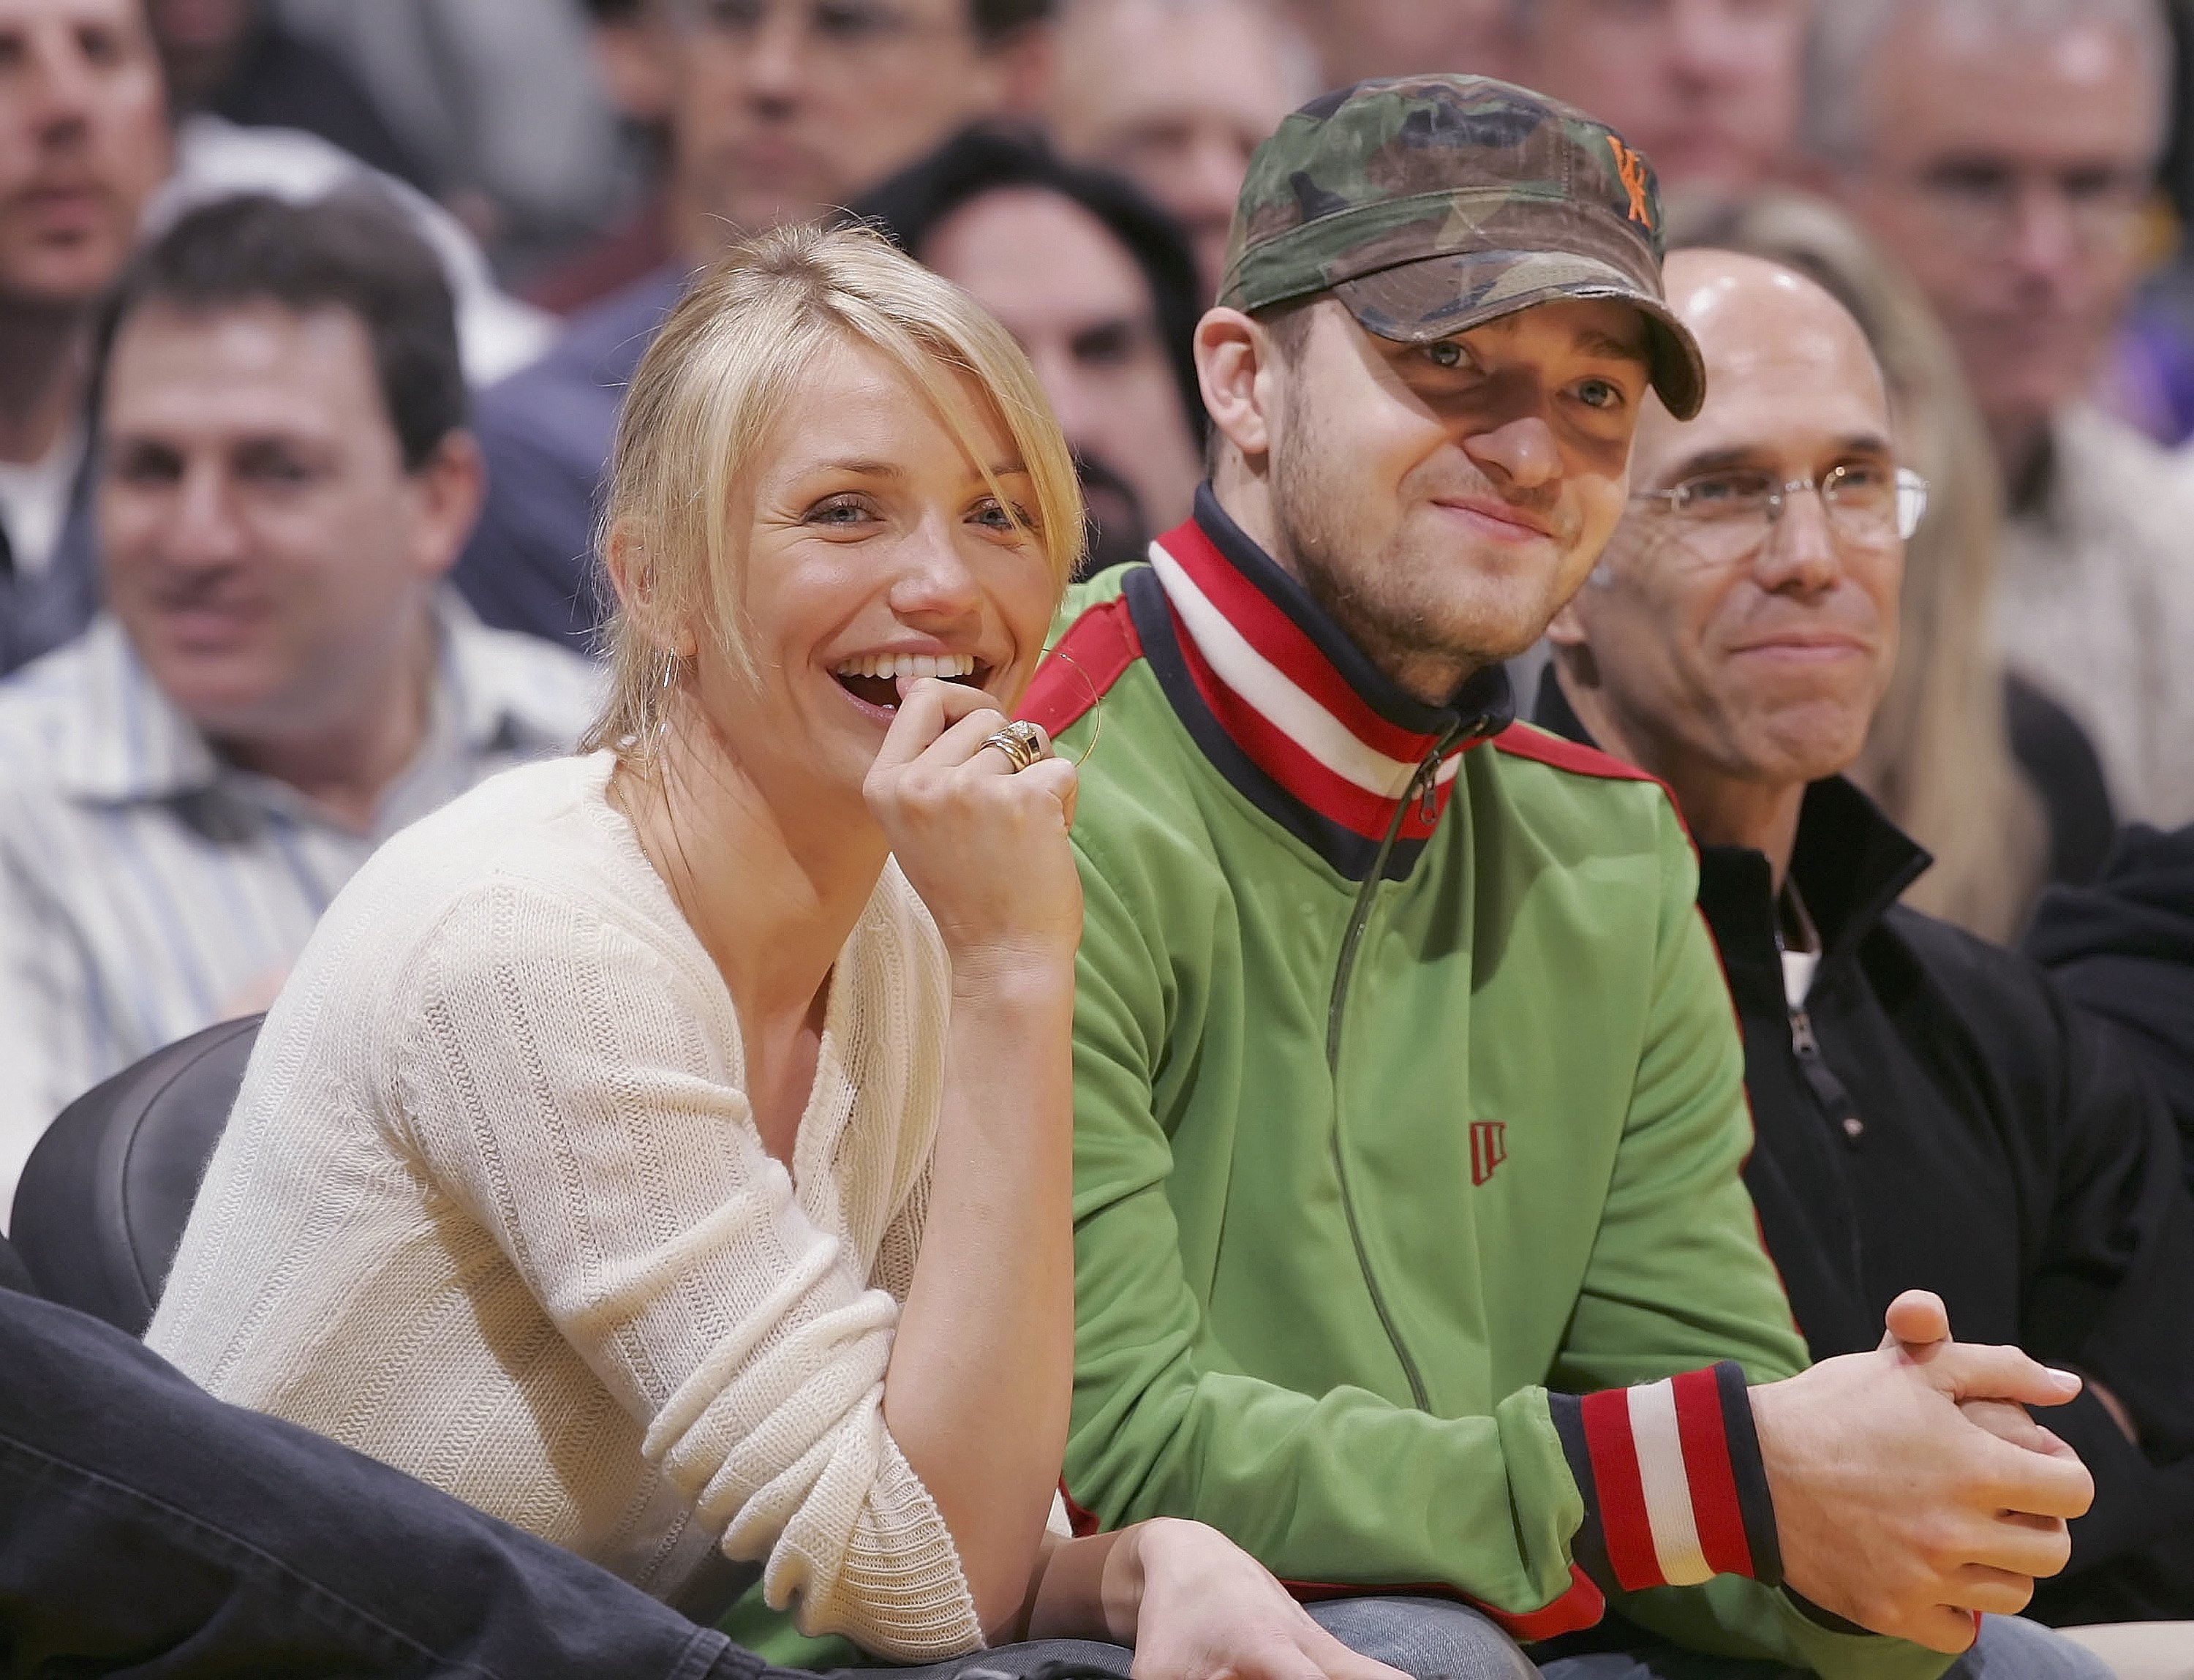 Cameron Diaz and Justin Timberlake watching a game between The Lakers and The Clippers in Los Angeles, California on April 9, 2006 | Source: Getty Images